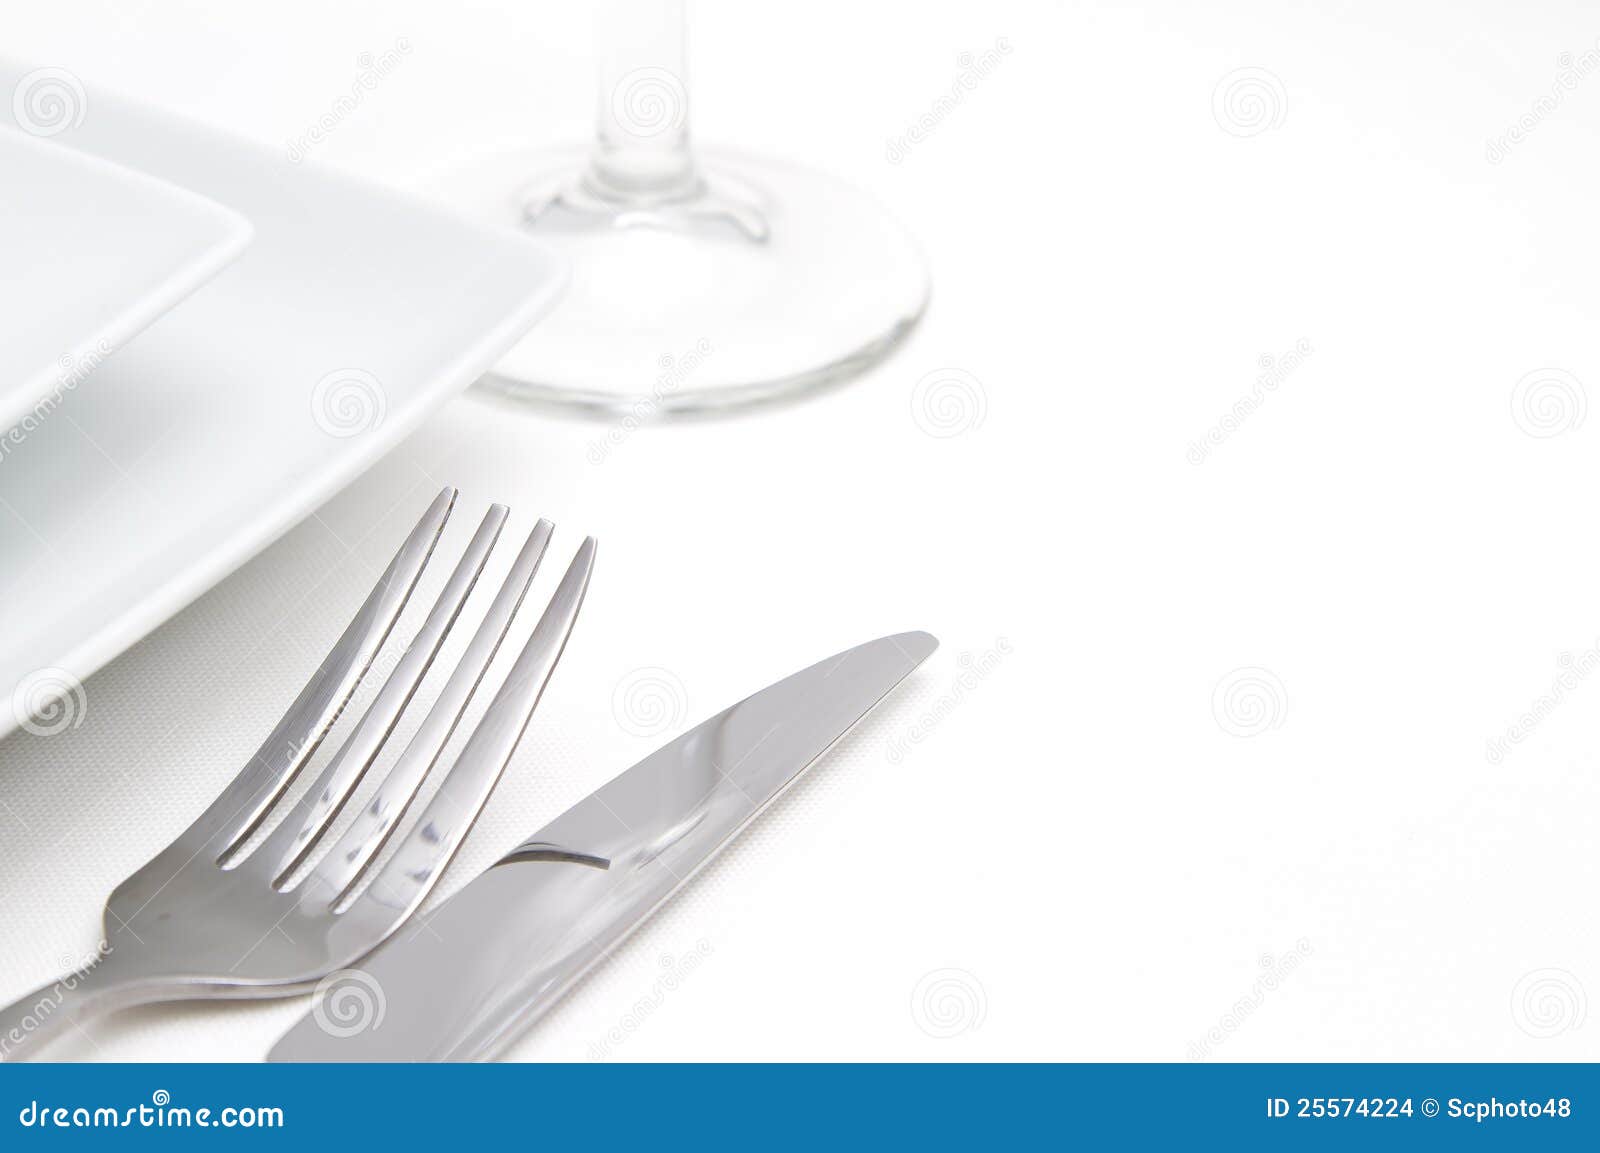 place setting with glass